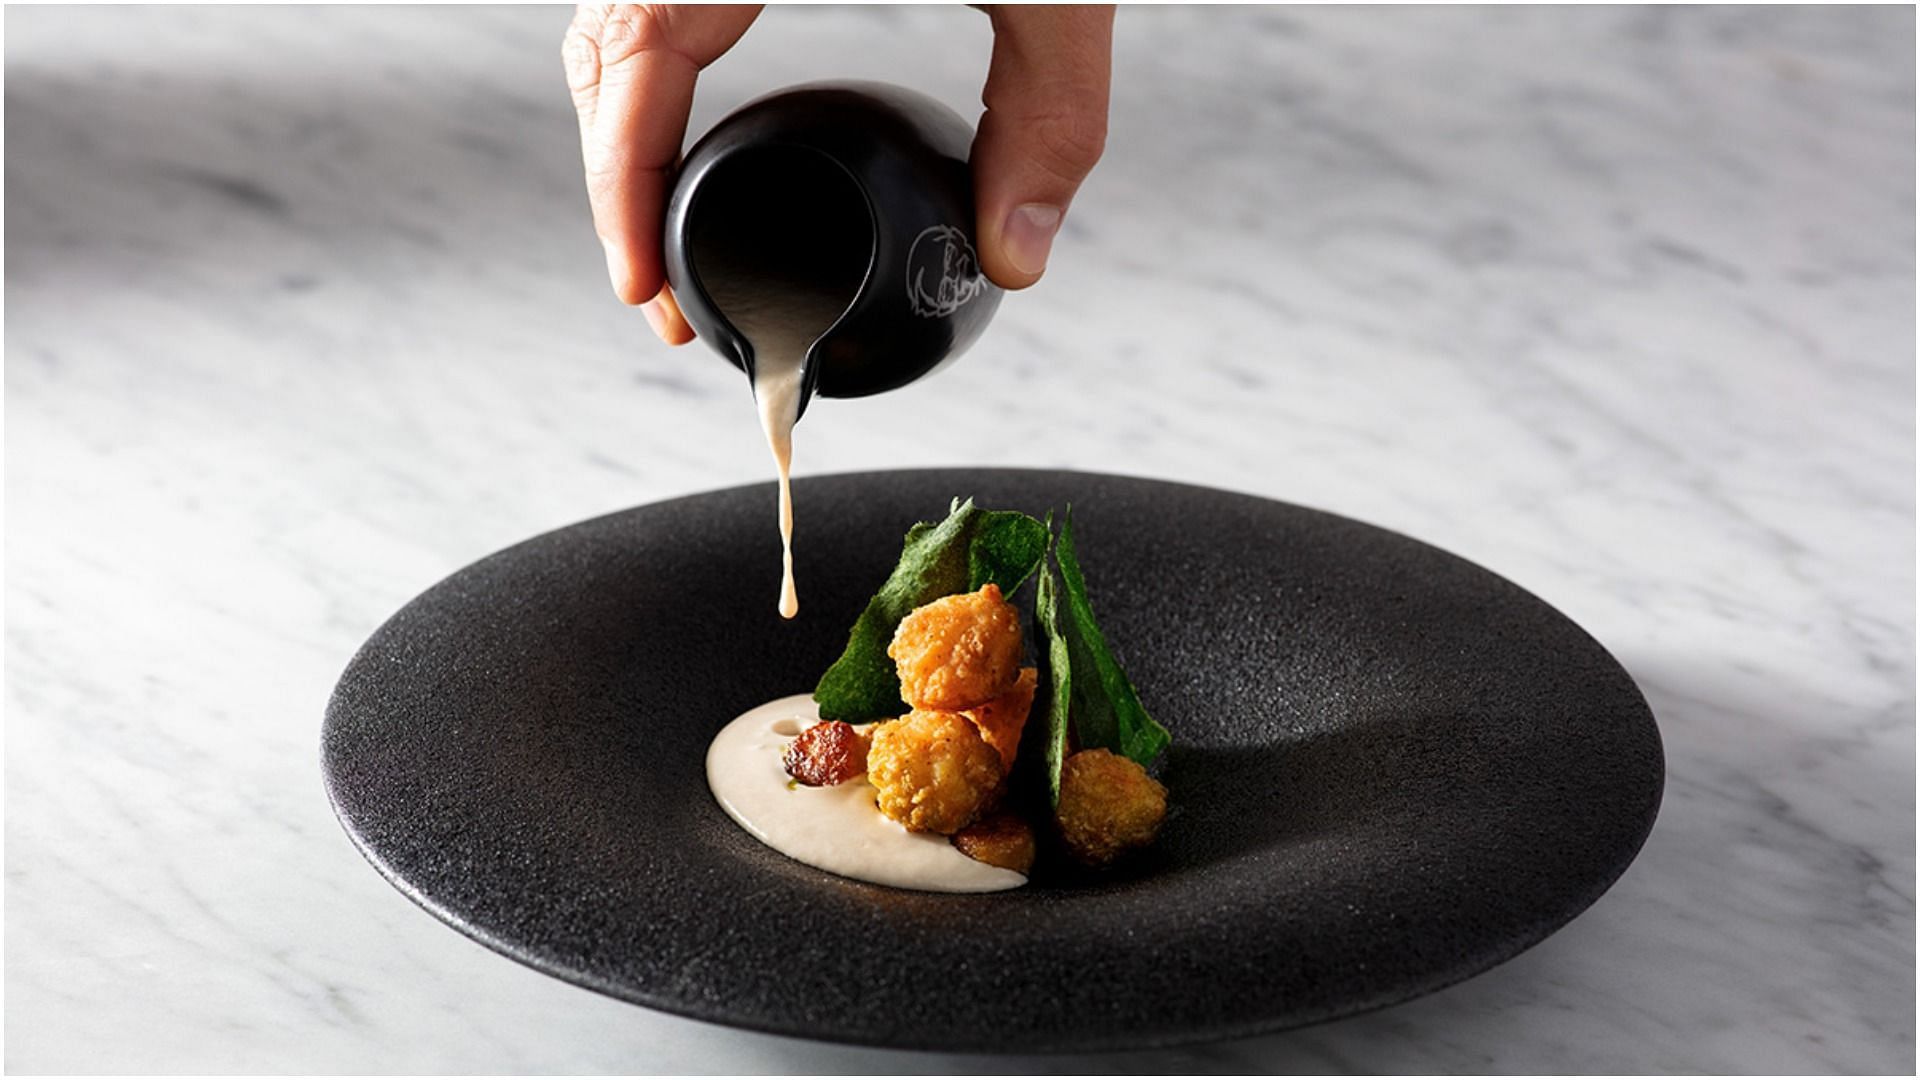 Popcorn Chicken: Paired with celeriac soup, mushroom gnocchi, and basil, topped off with an edible floral garnish (Image via KFC Australia)